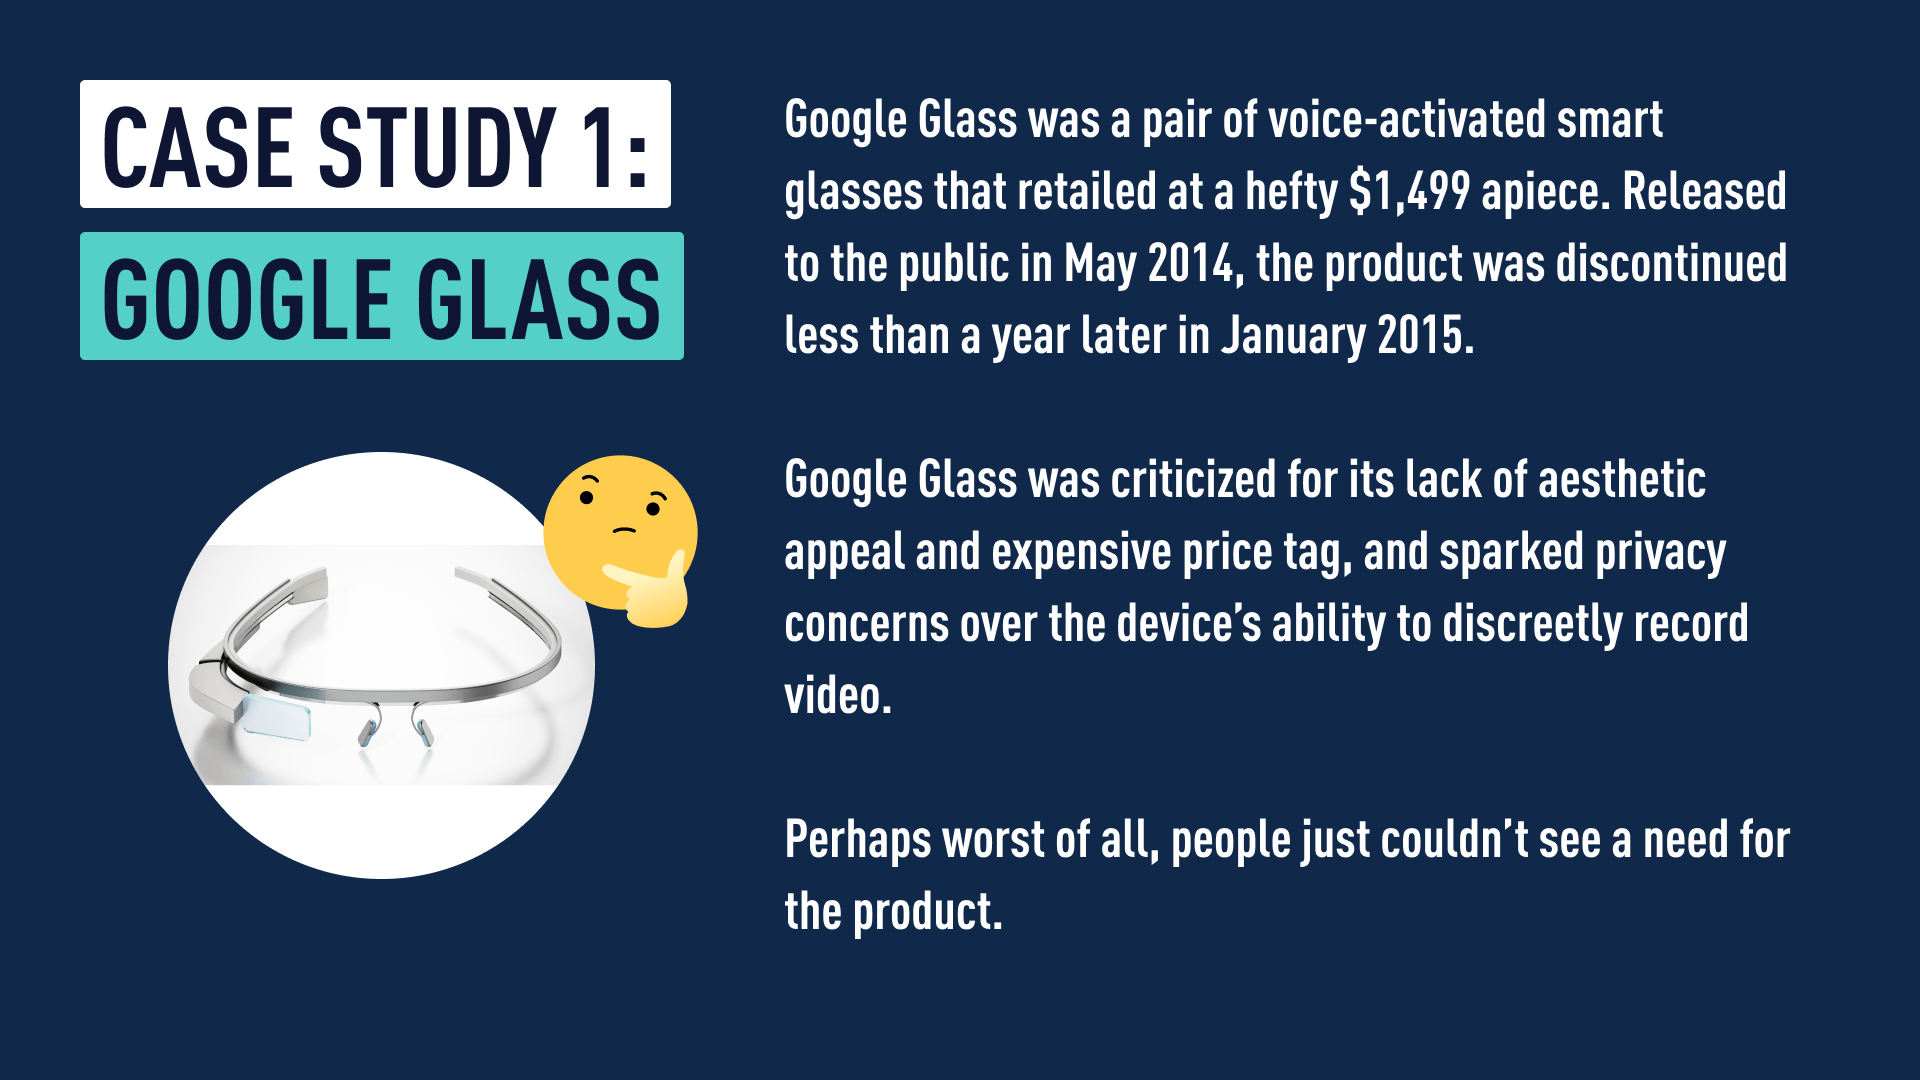 A case study about the Google Glass - an example of bad product design